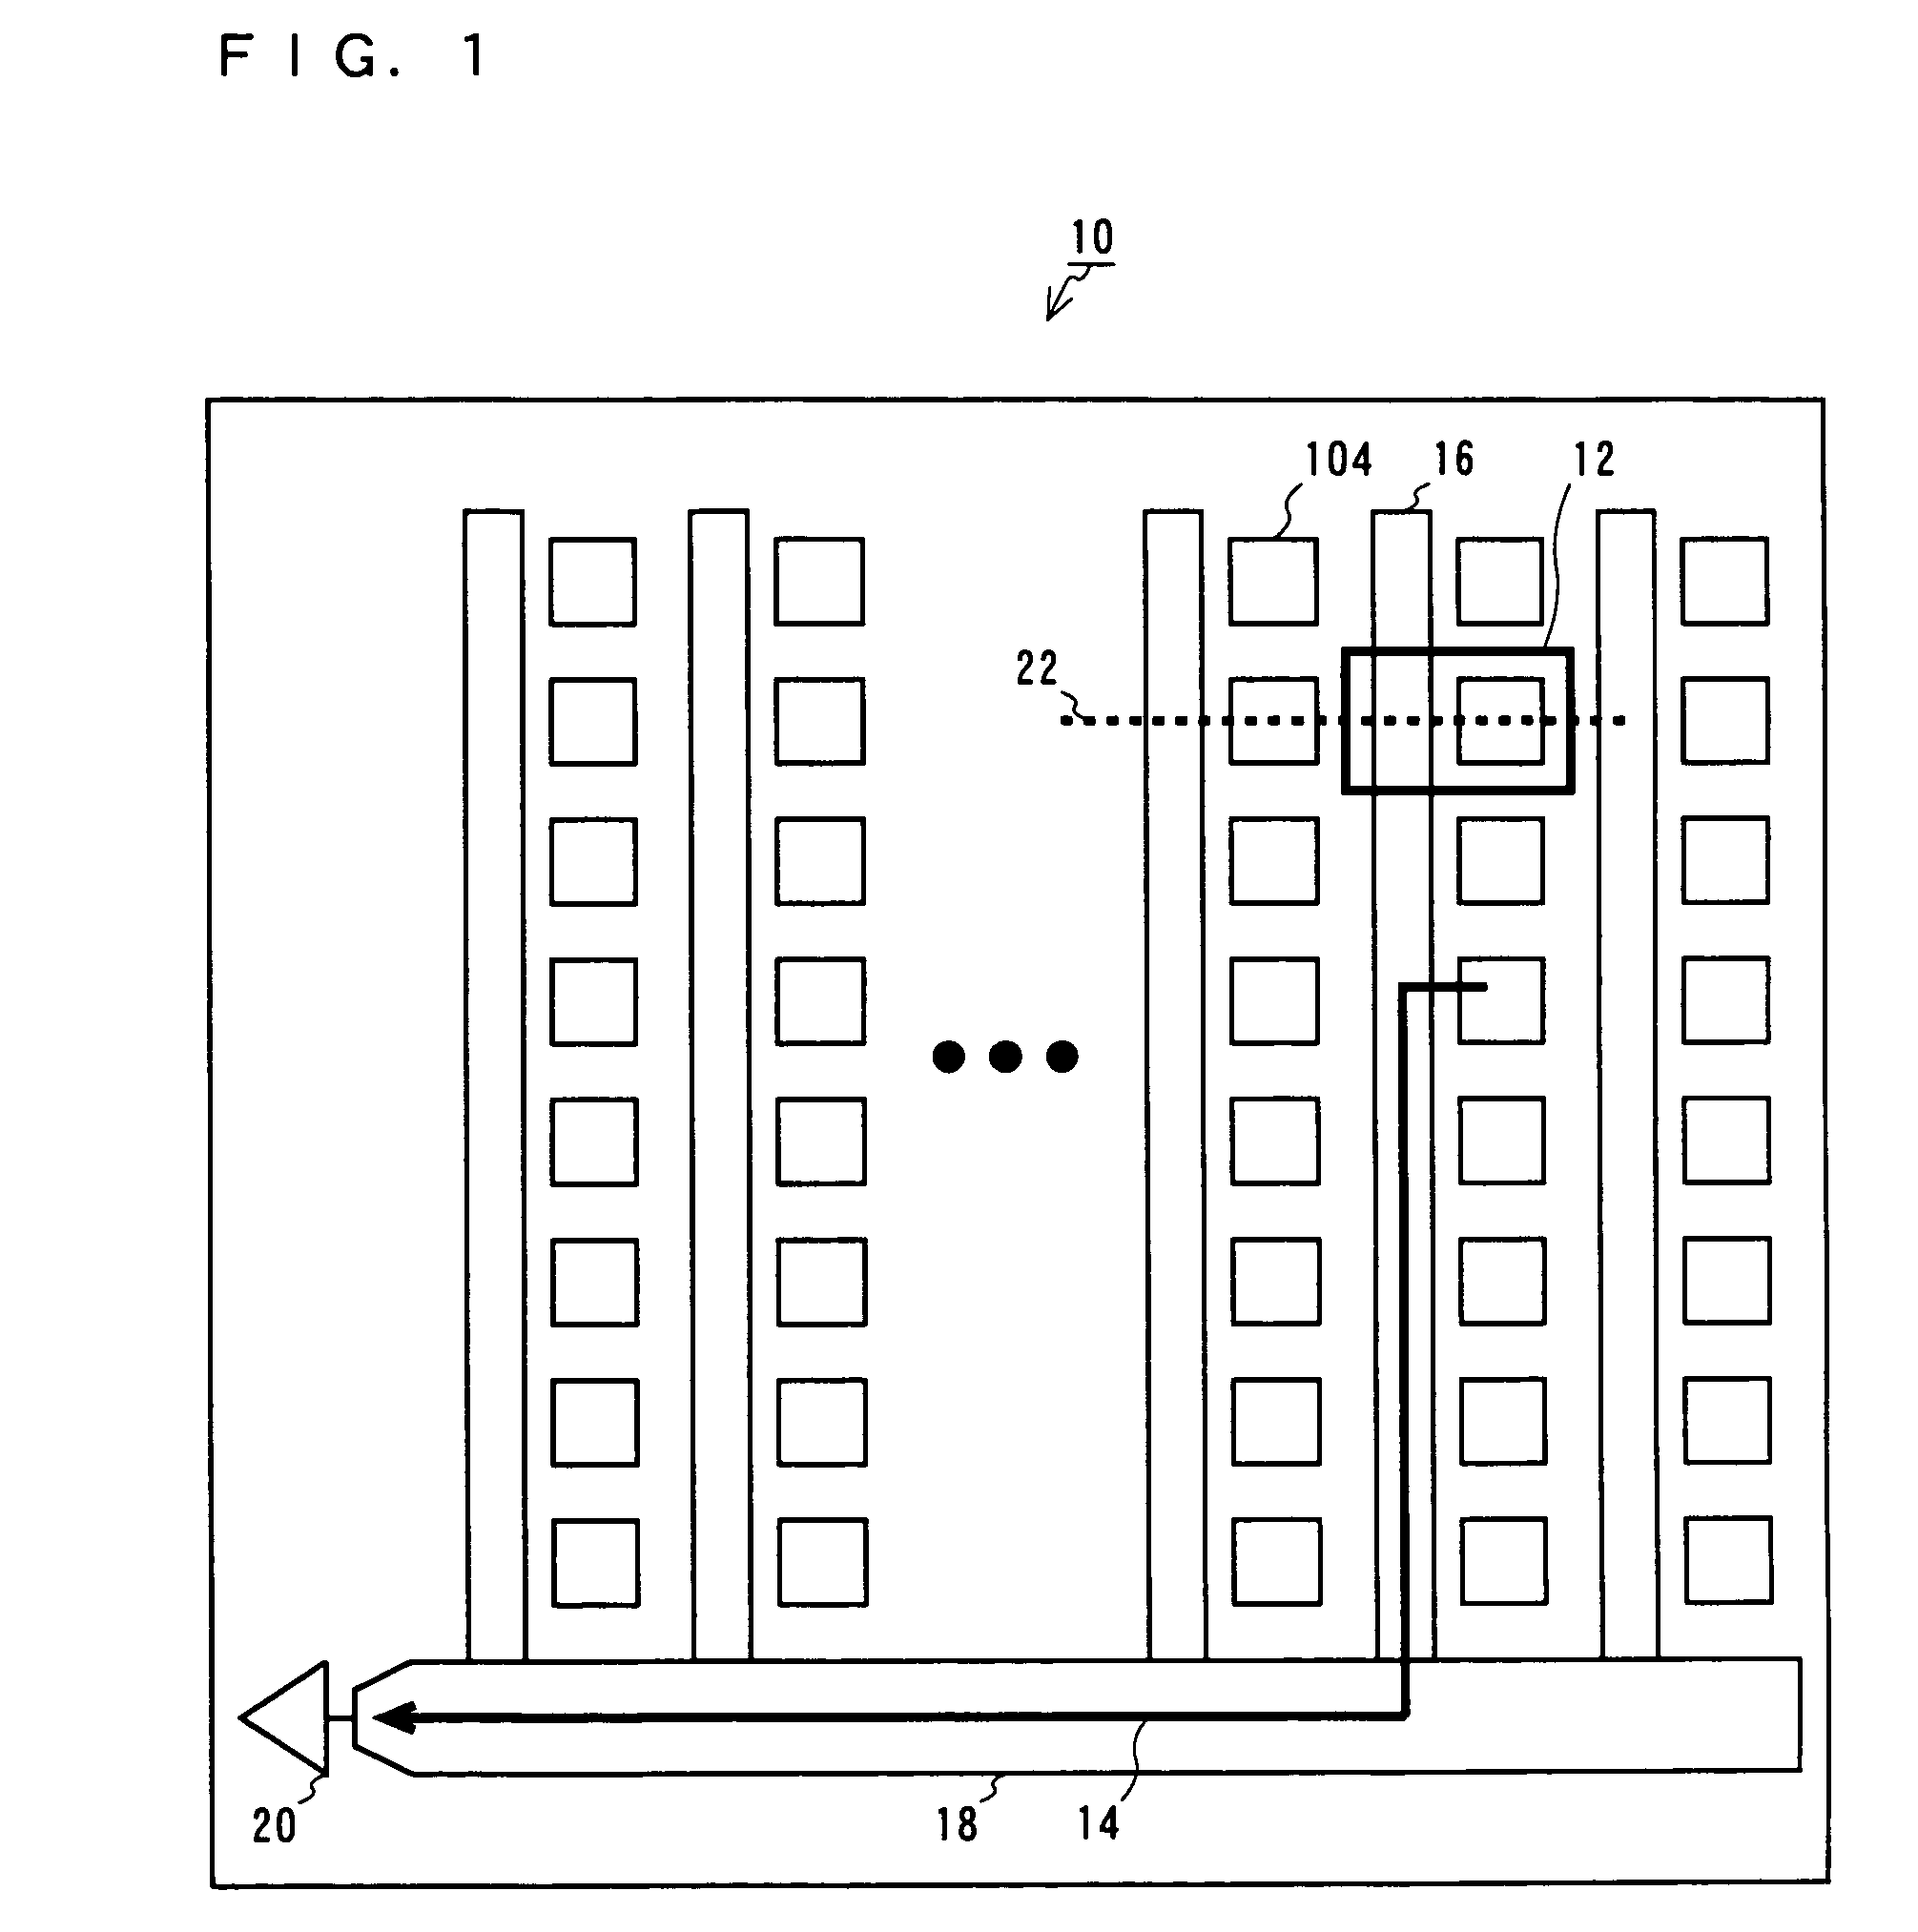 Solid state imaging device including annular and center lens in contact with each other